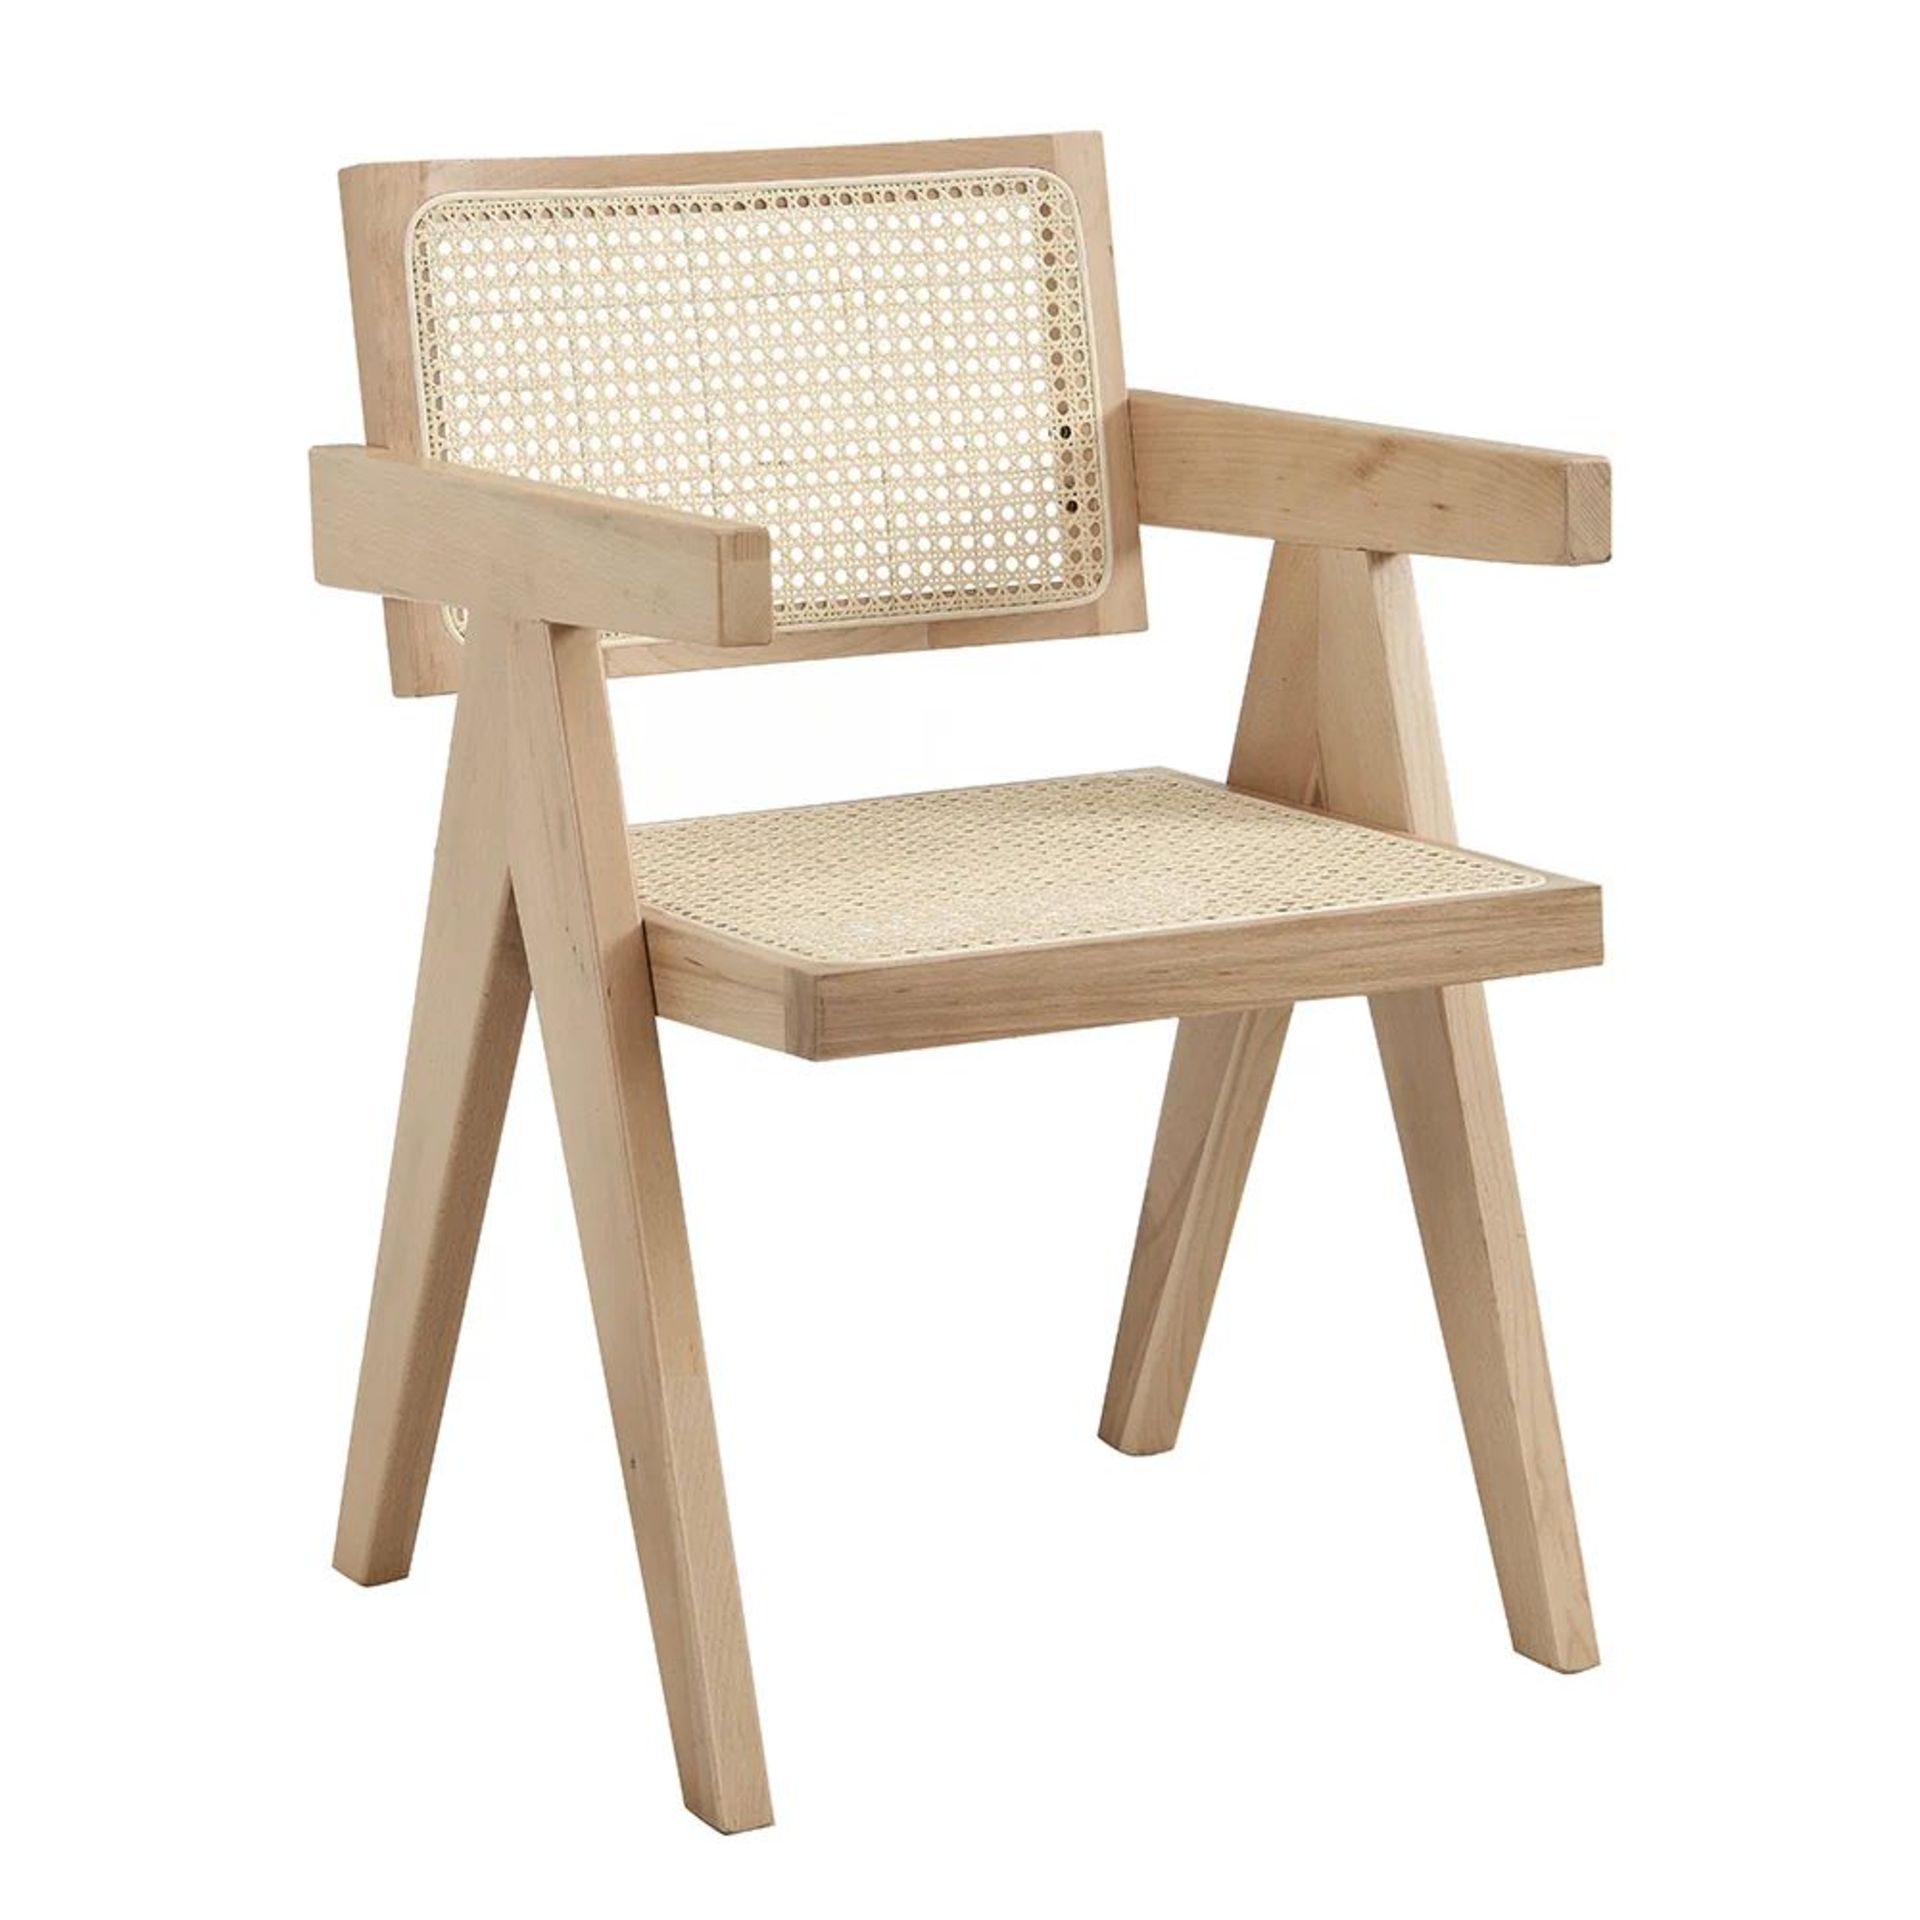 Jeanne Natural Colour Cane Rattan Solid Beech Wood Dining Chair. - R13.11. RRP £239.99. The cane - Image 4 of 4